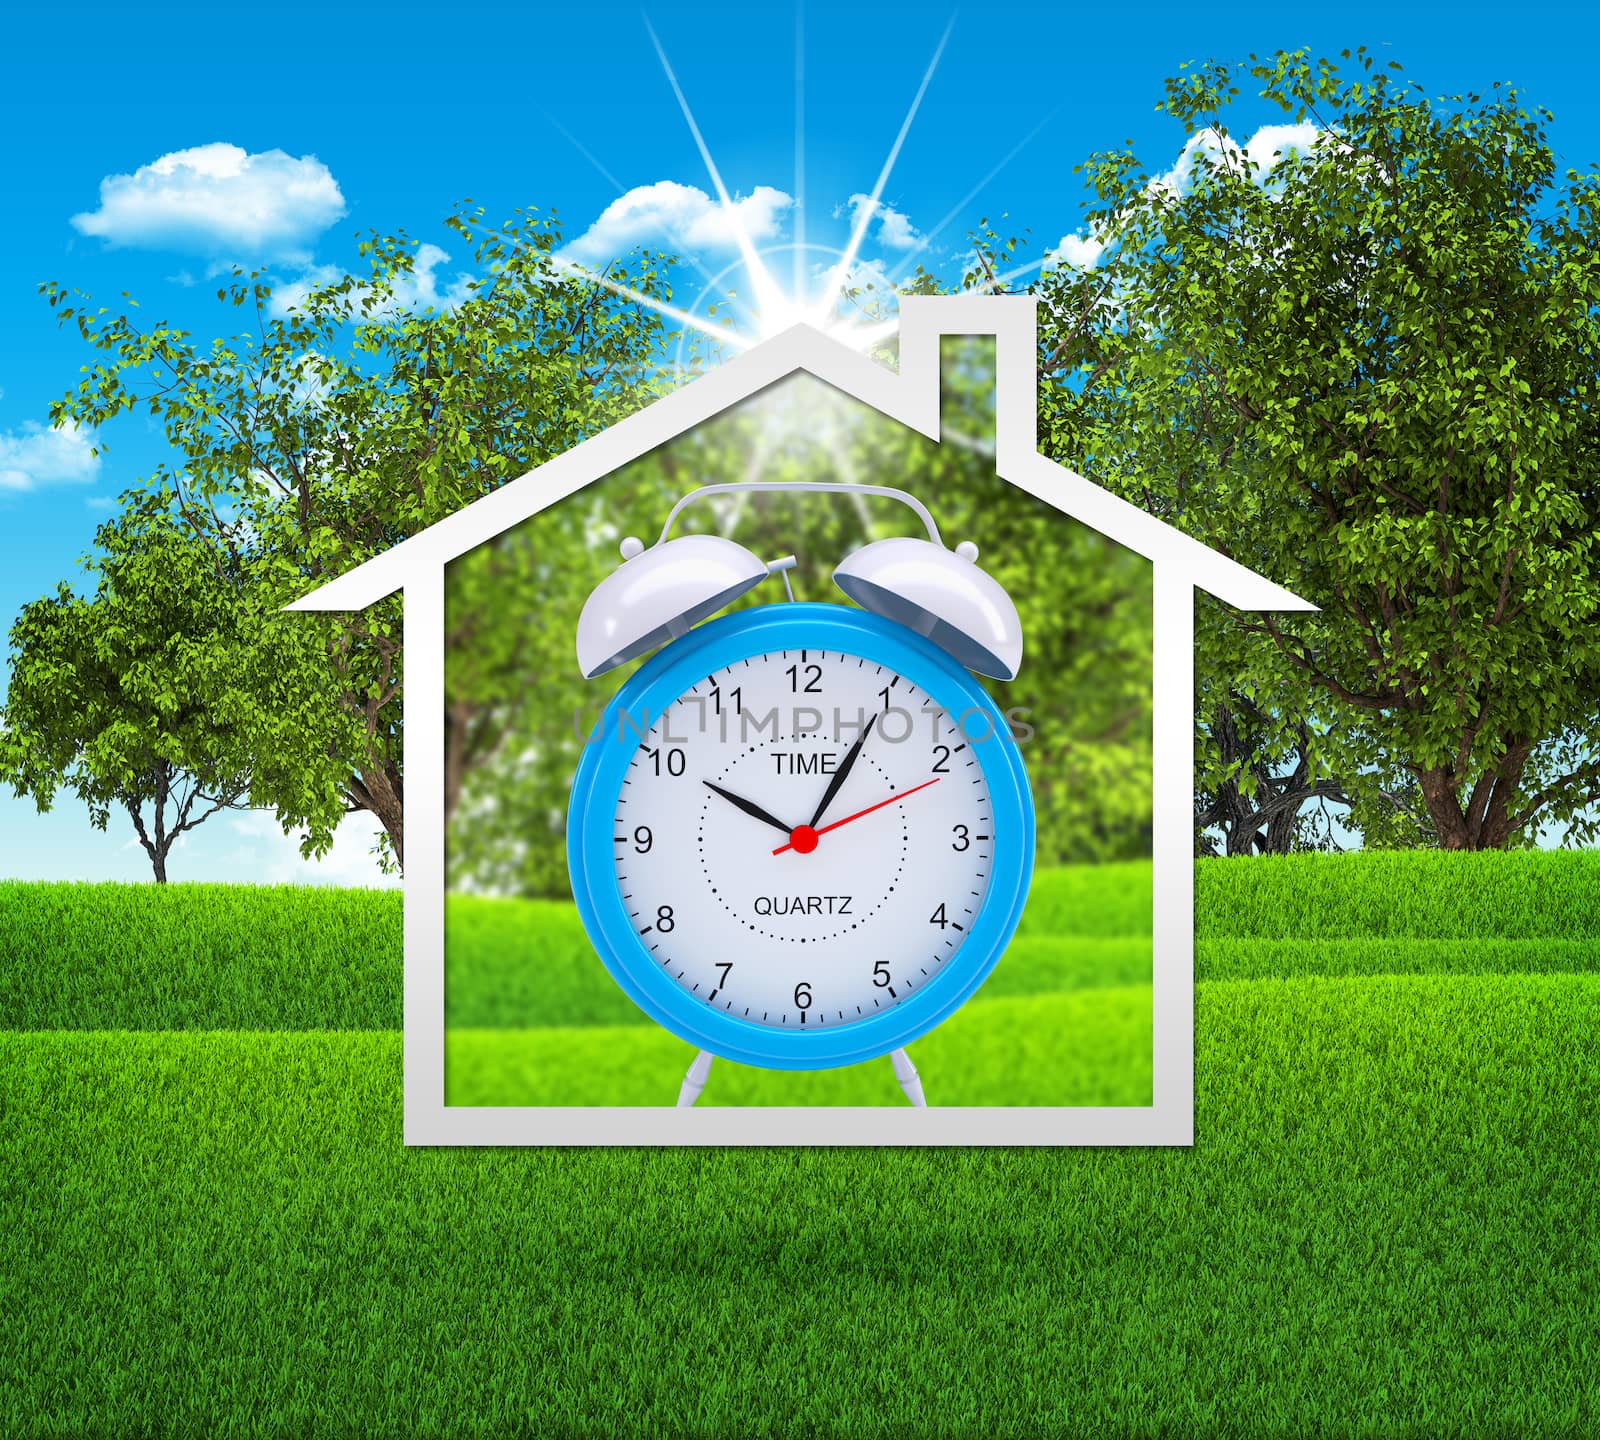 House icon with alarm clock on background of green grass, trees and blue sky